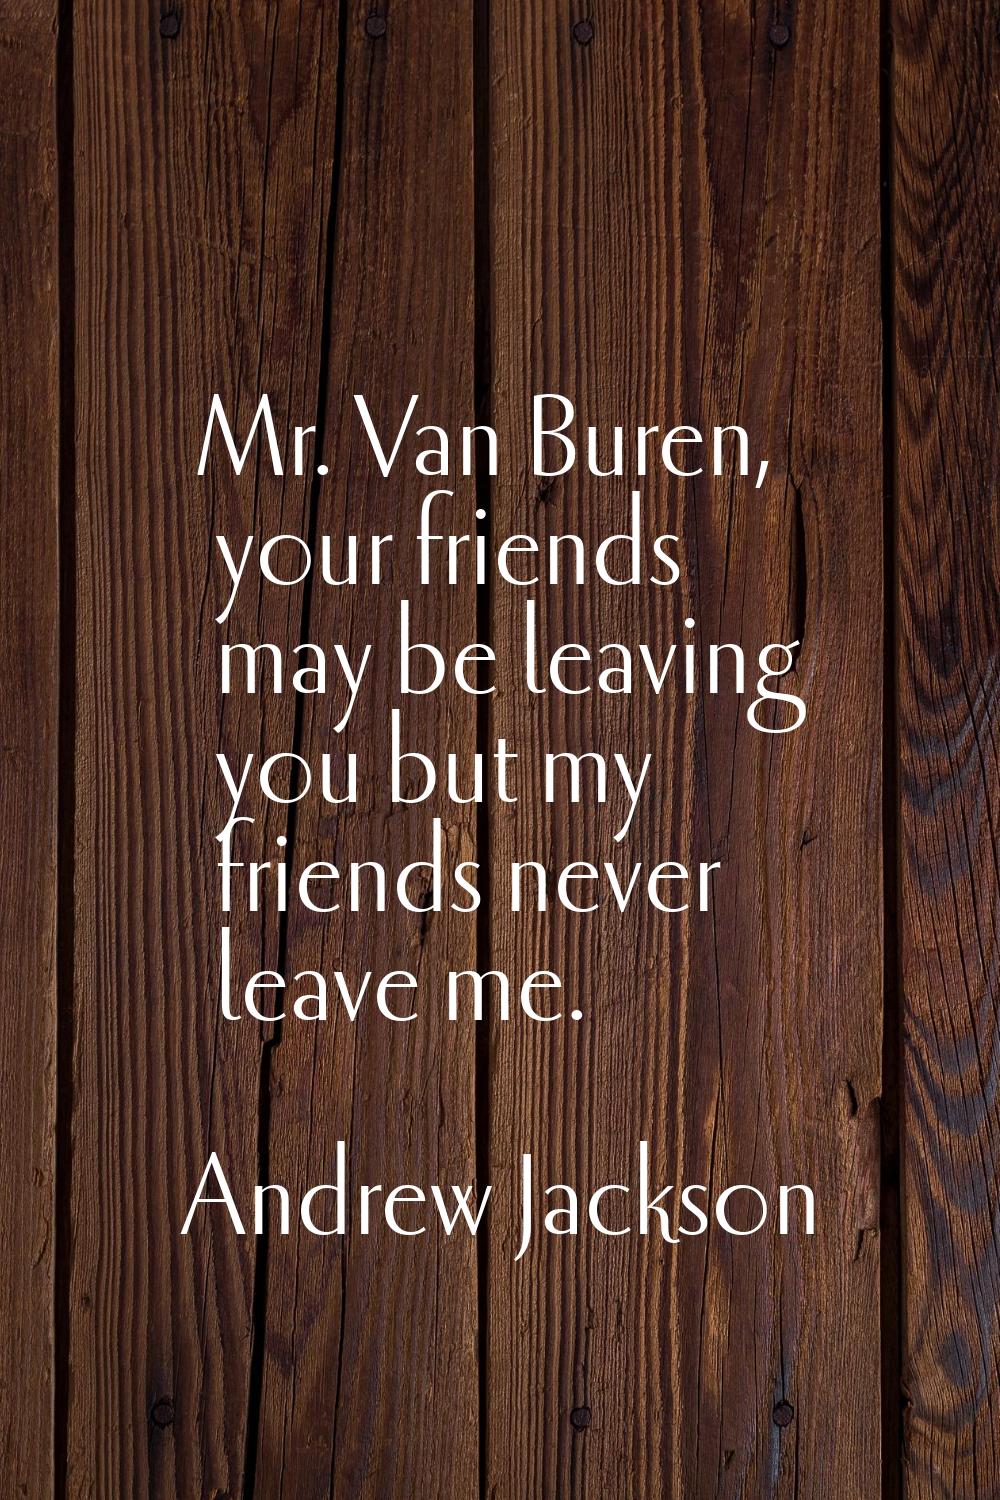 Mr. Van Buren, your friends may be leaving you but my friends never leave me.